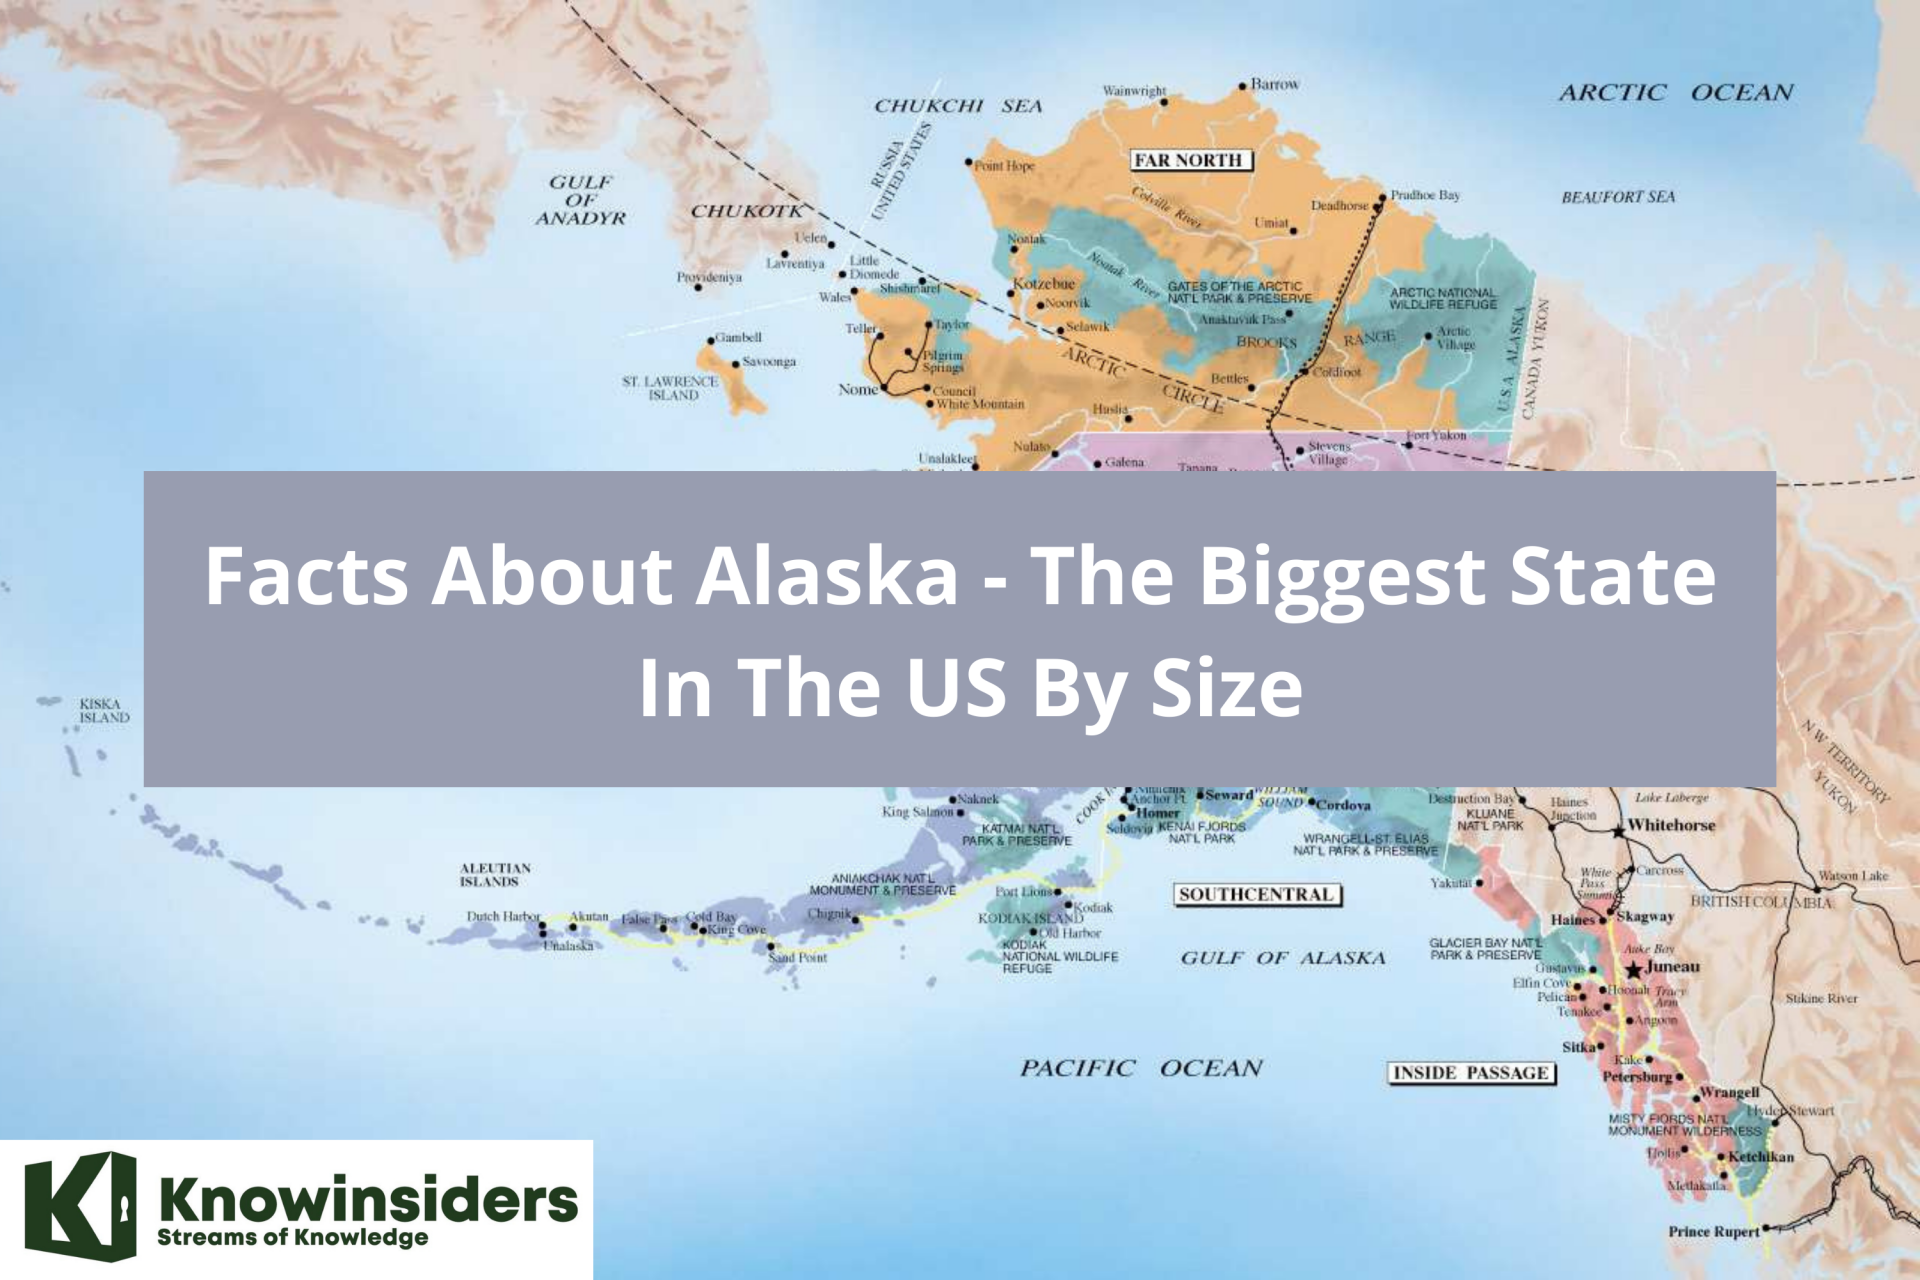 Alaska's Amazing Facts - The Biggest State In The US by Land Area